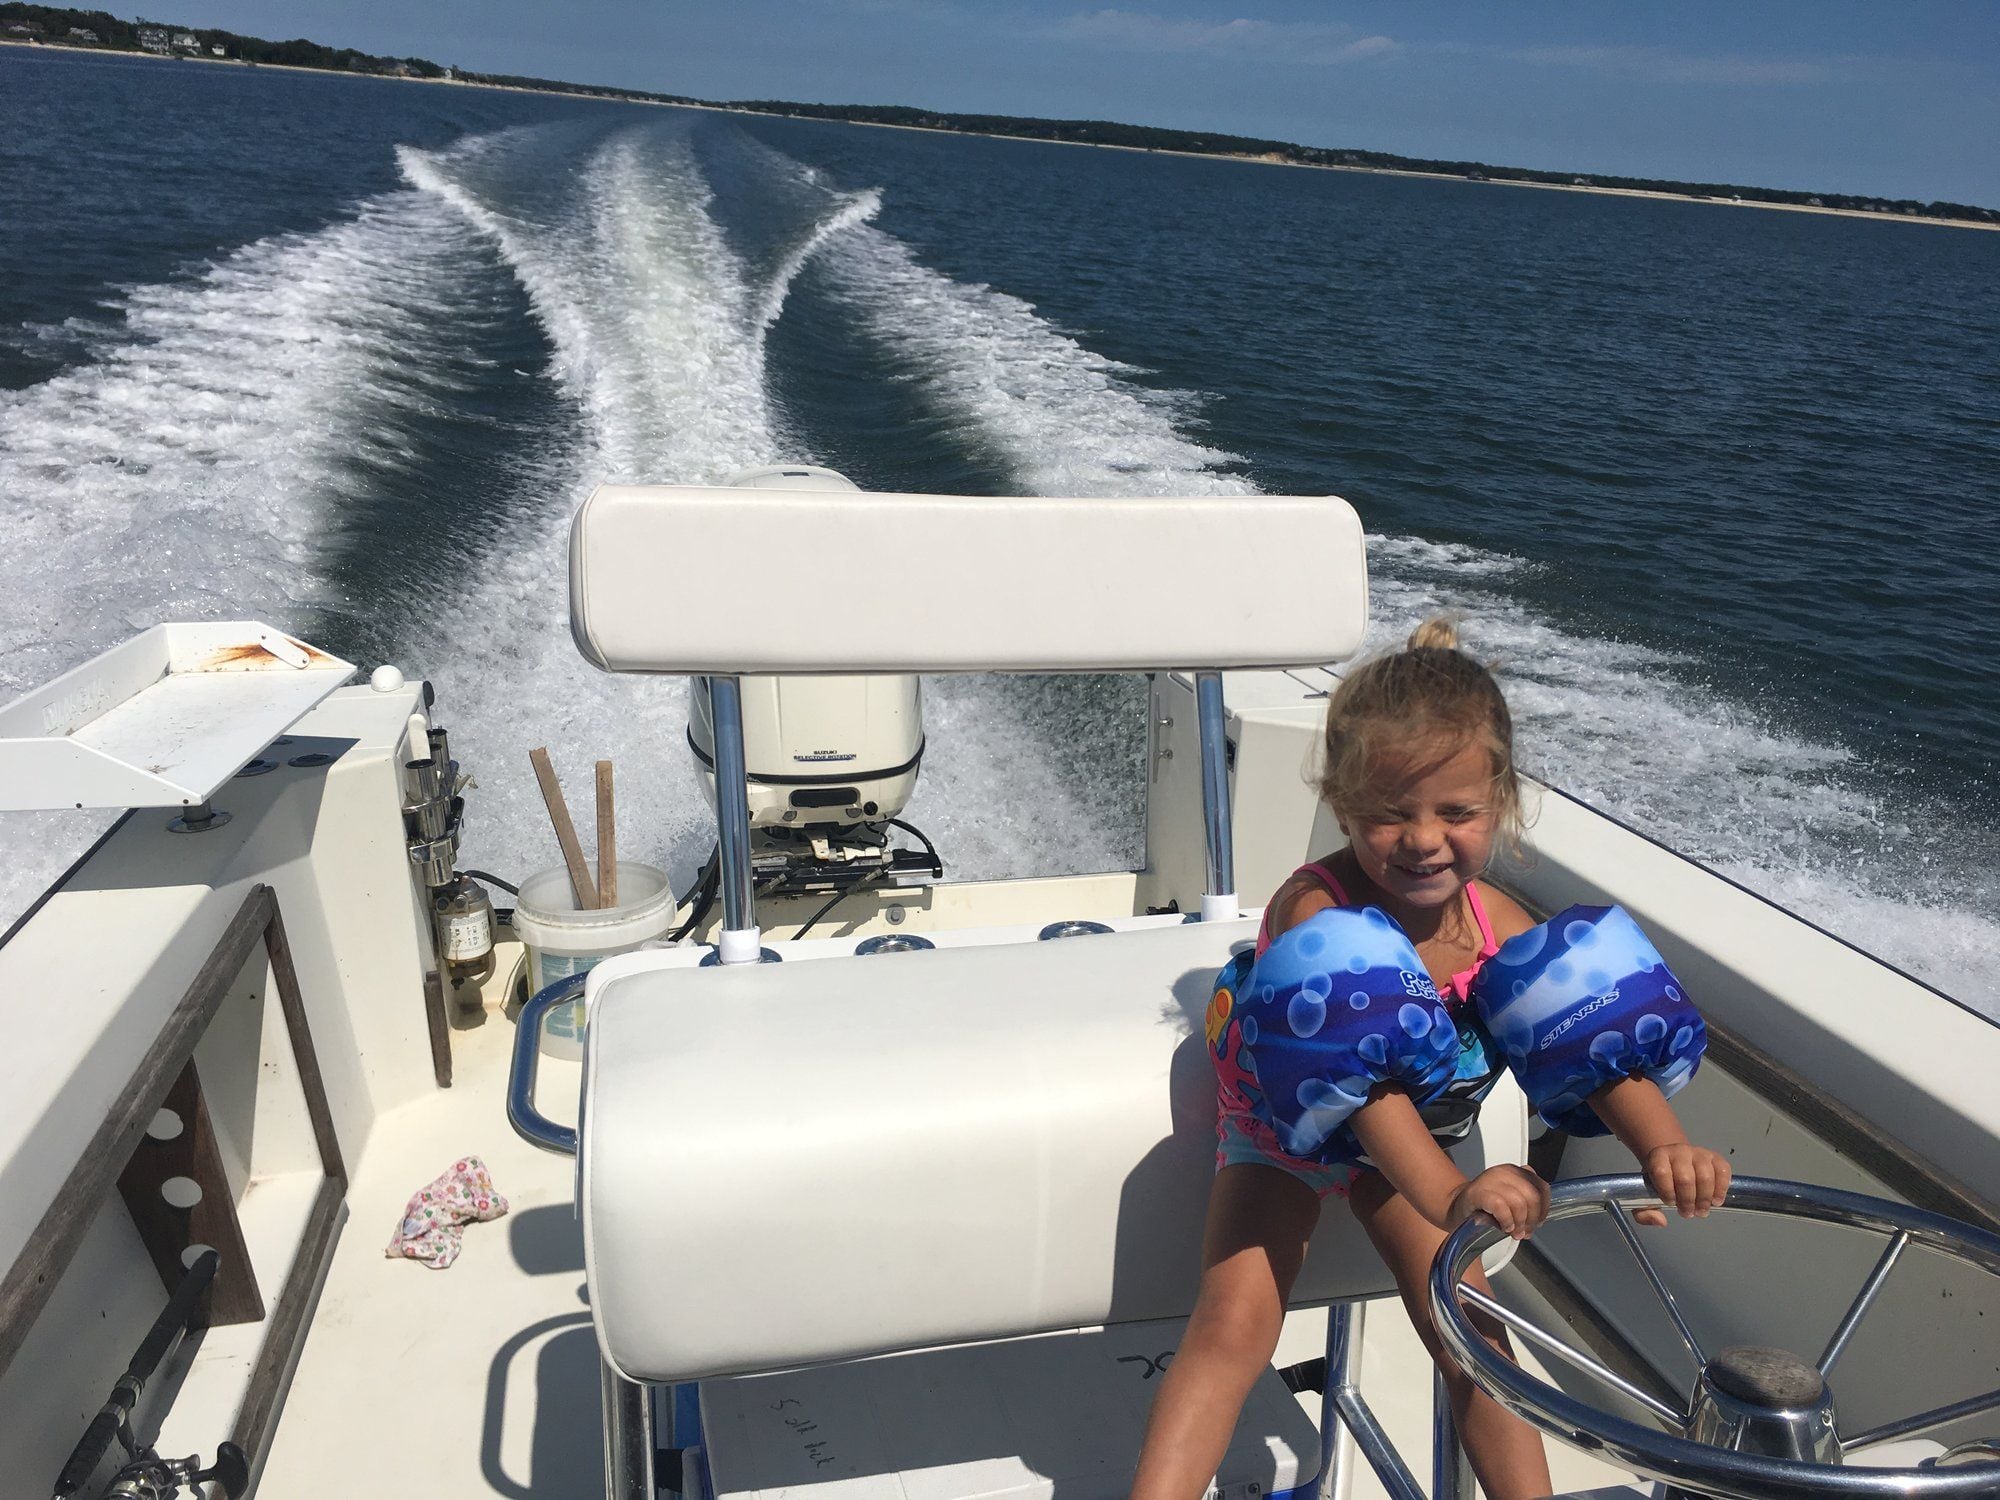 Kid on boats - How old? - The Hull Truth - Boating and Fishing Forum